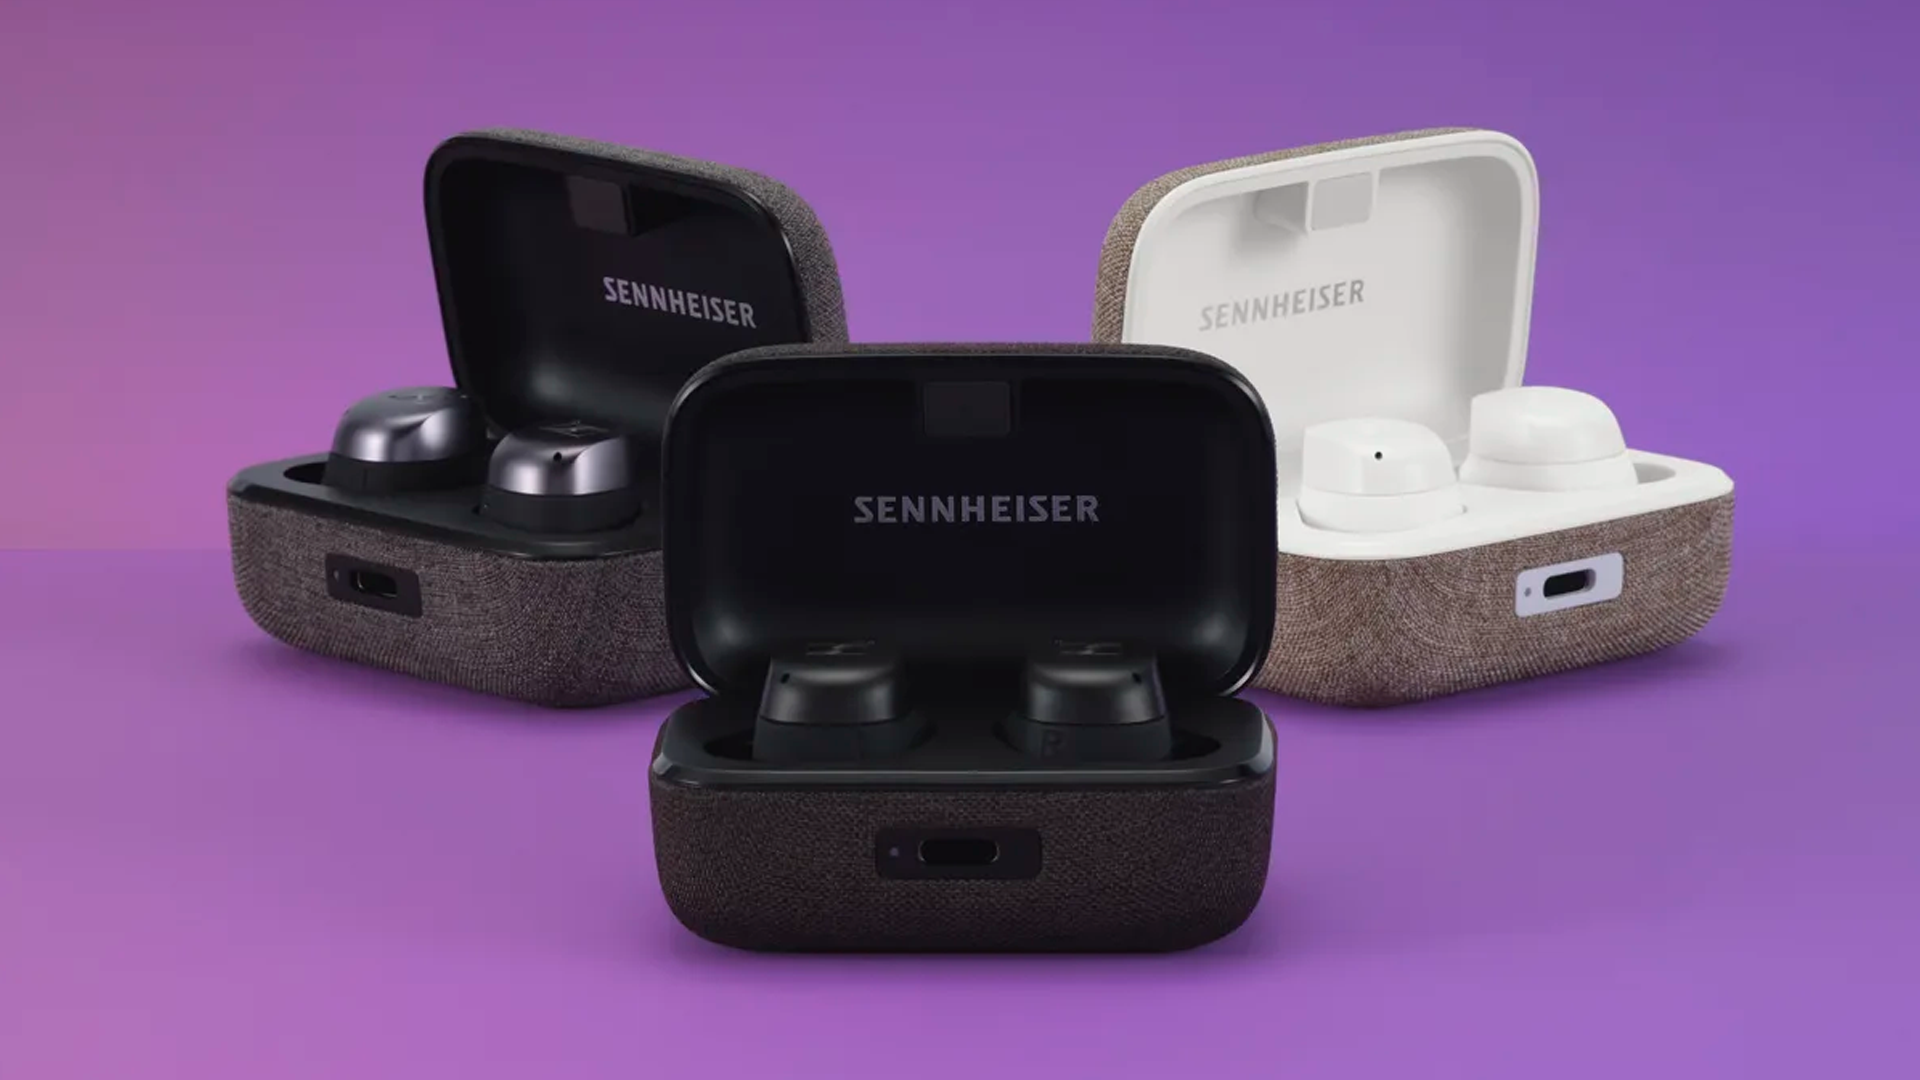 Sennheiser’s New Earbuds Tune Their ANC to Your Environment